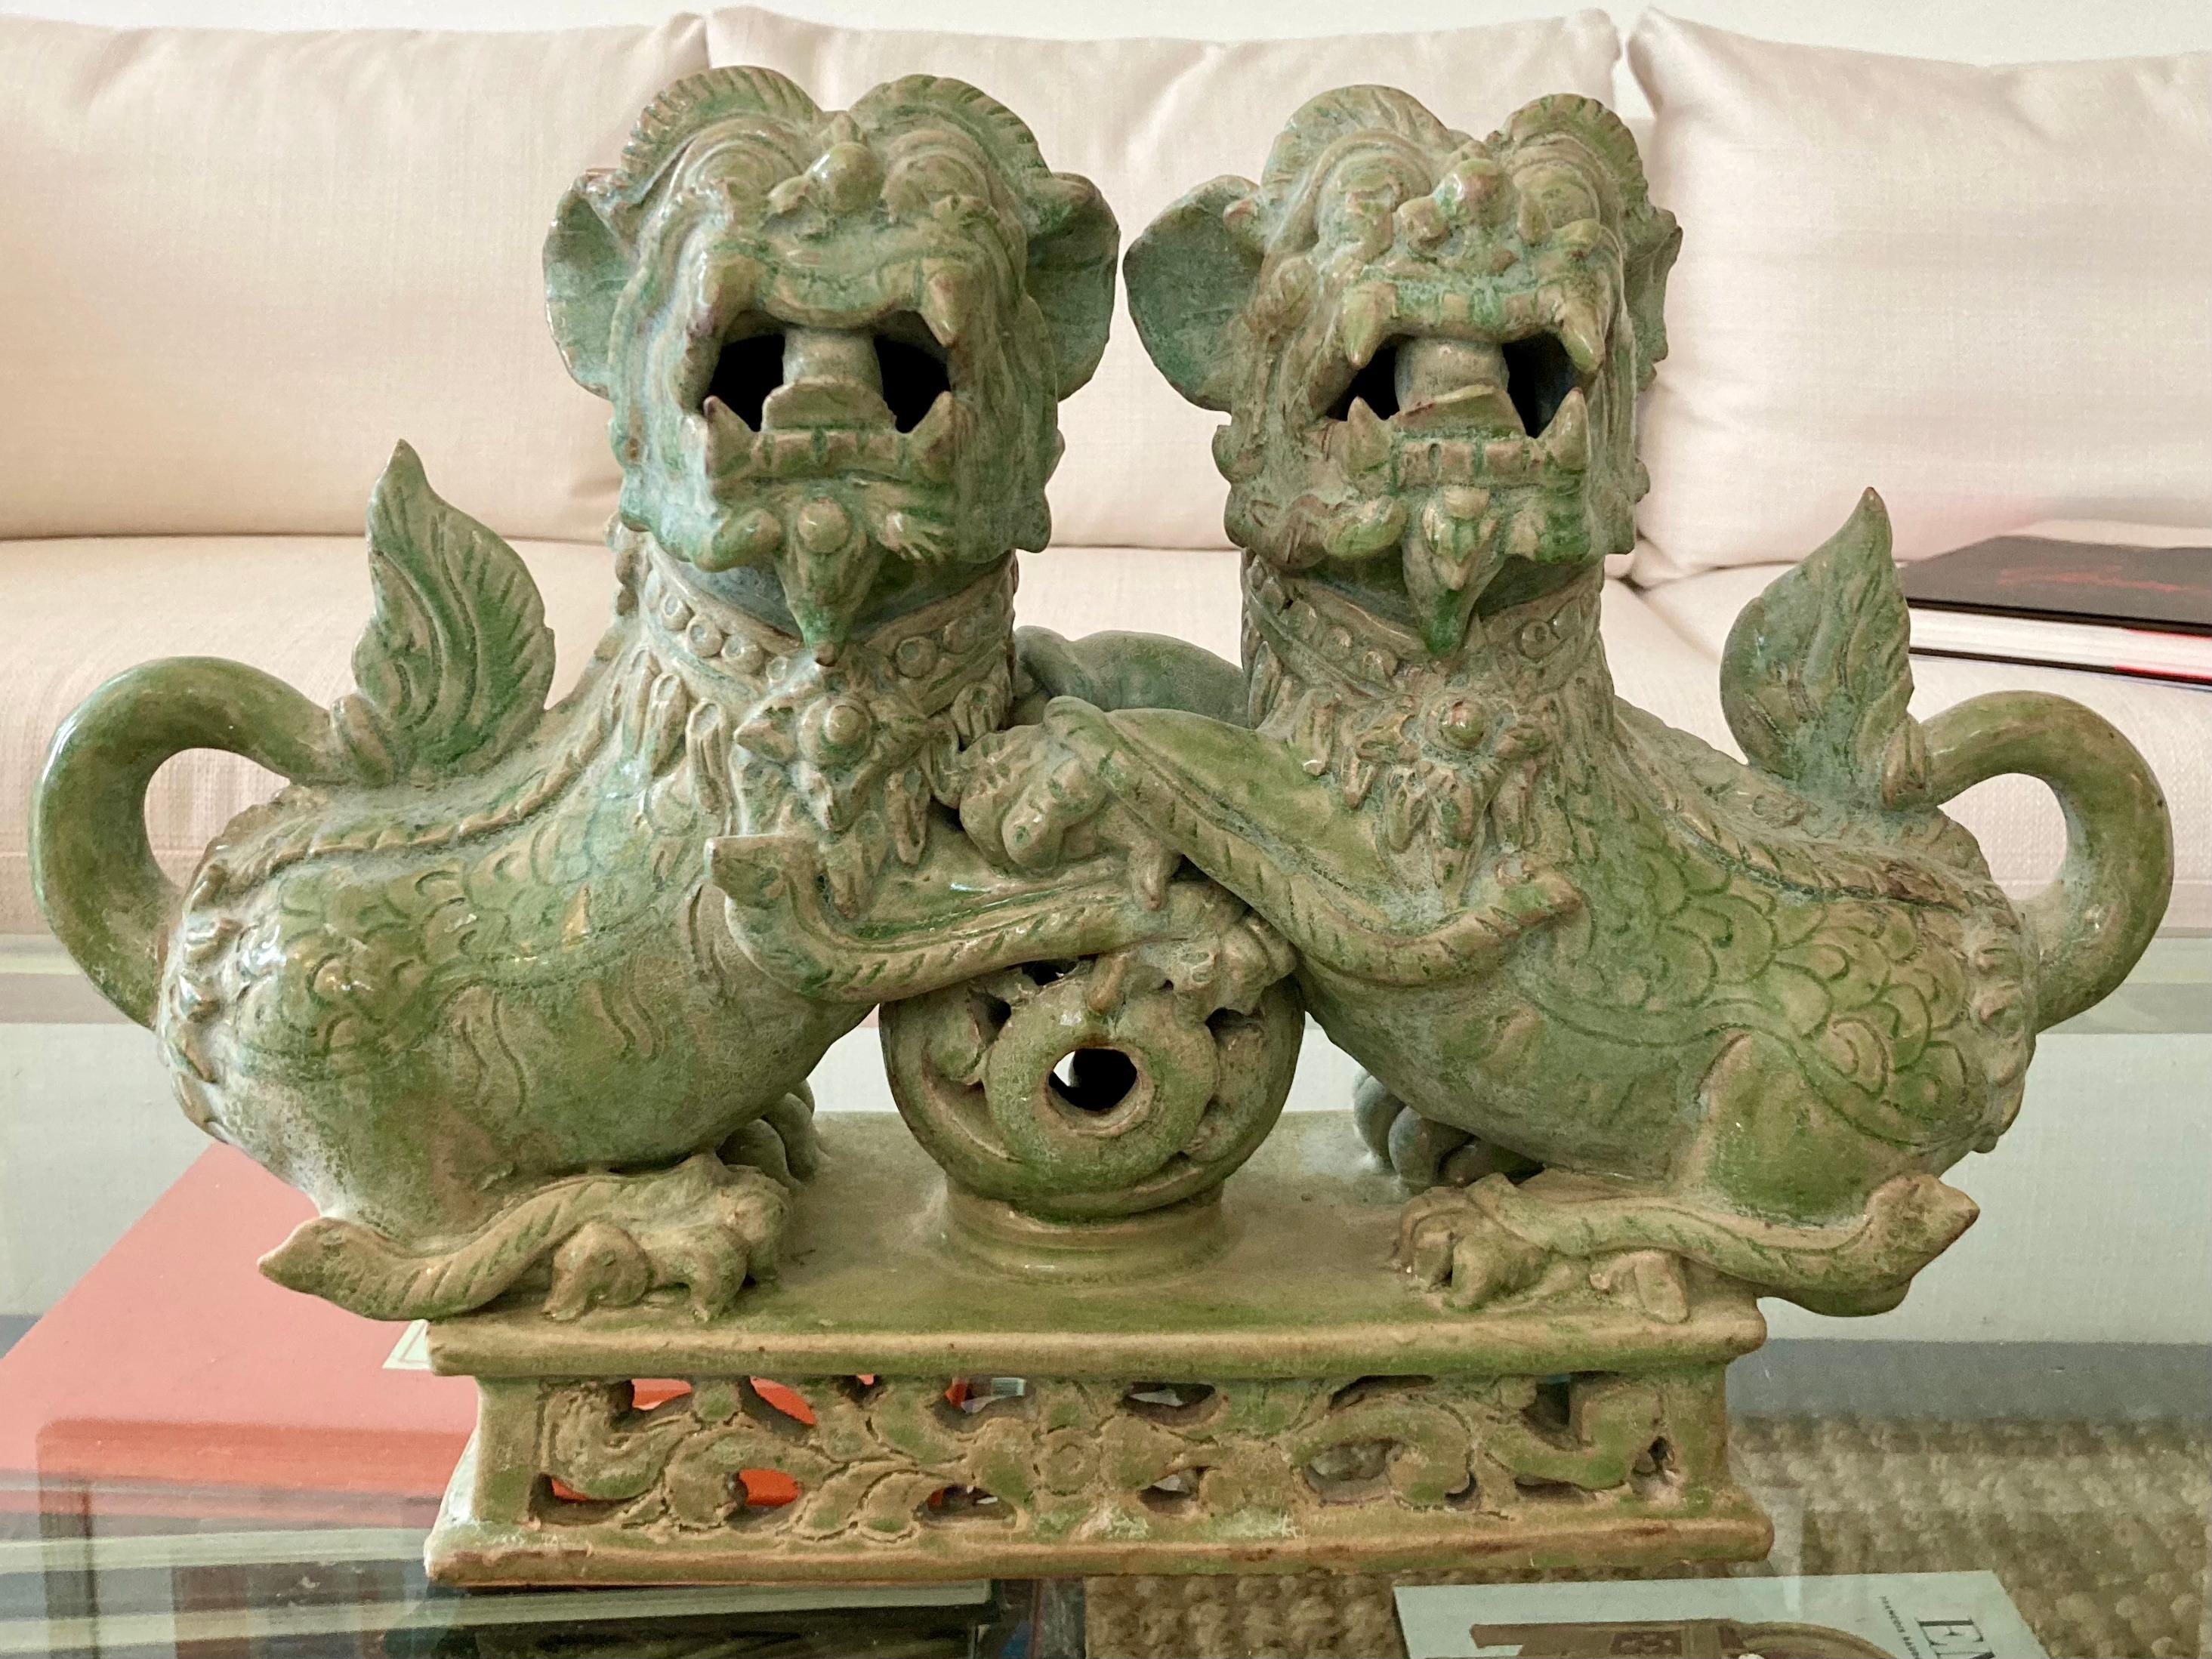 Beautiful male foo dogs holding and protecting the earth. Very rare find and interesting take on the foo dogs considering they're both male.